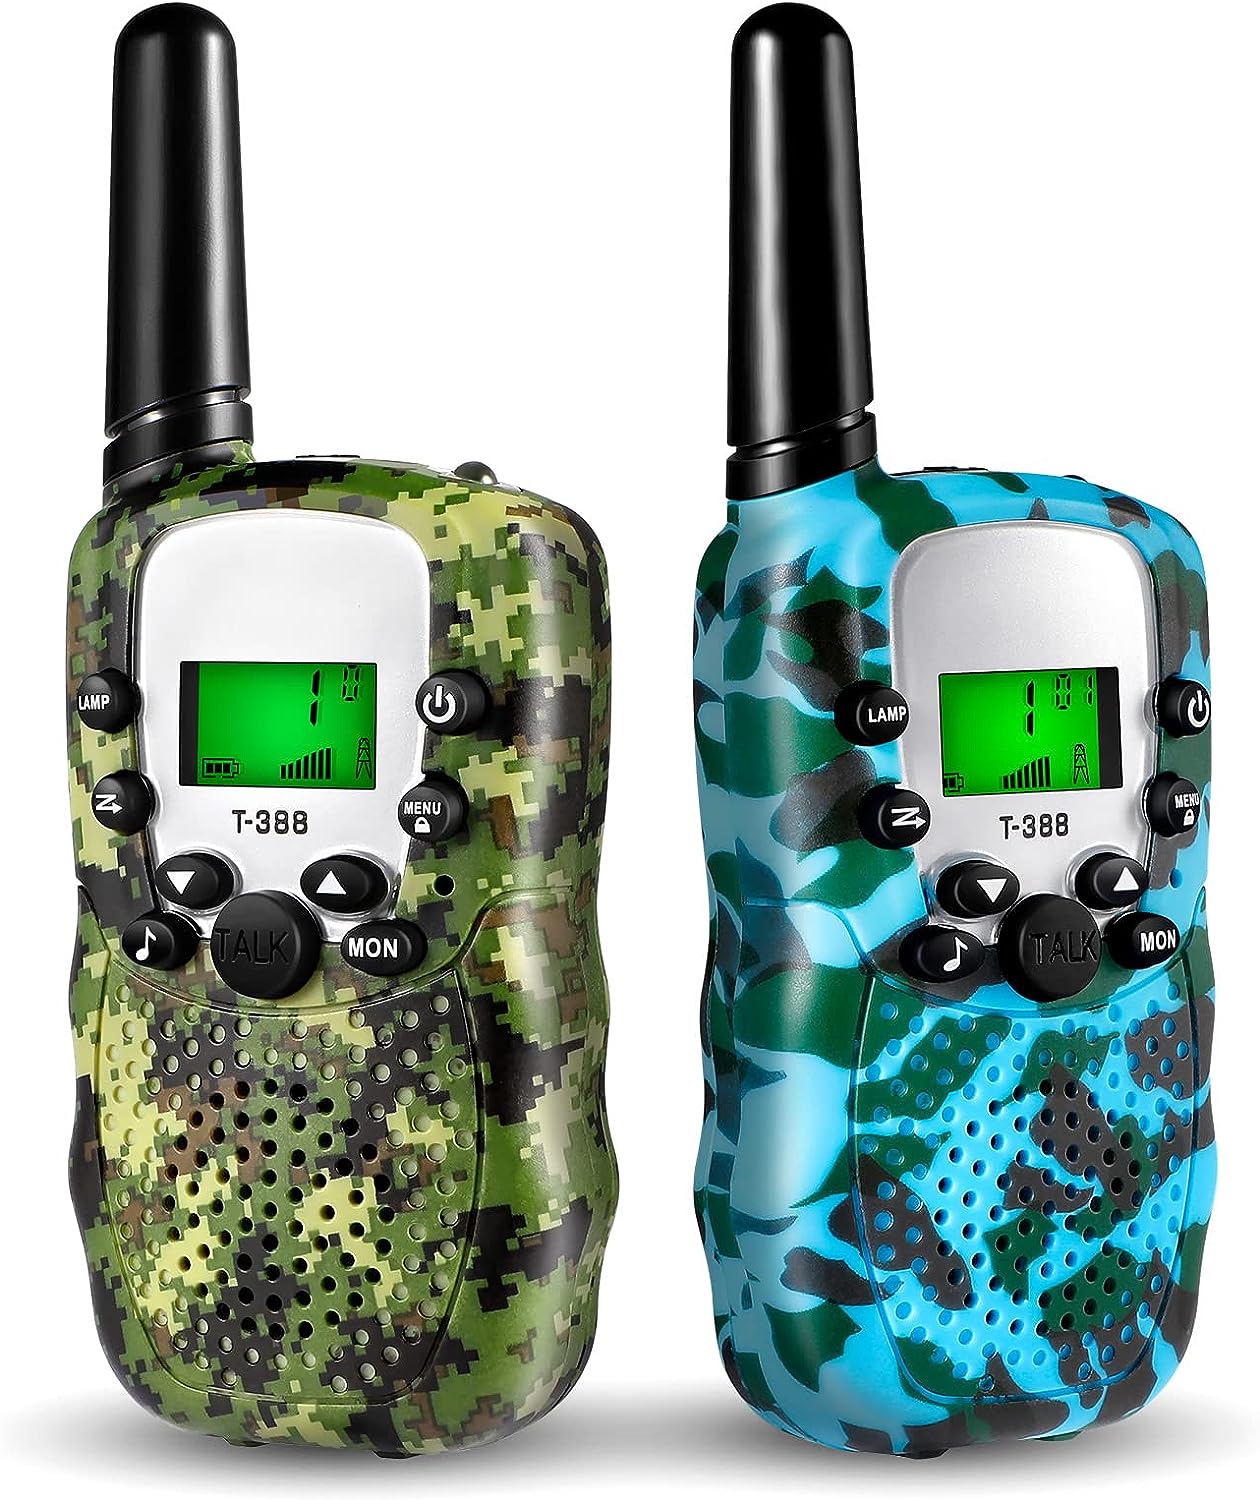 GINMIC Walkie Talkie for Kids, Toys for 3-12 Year Old [...]